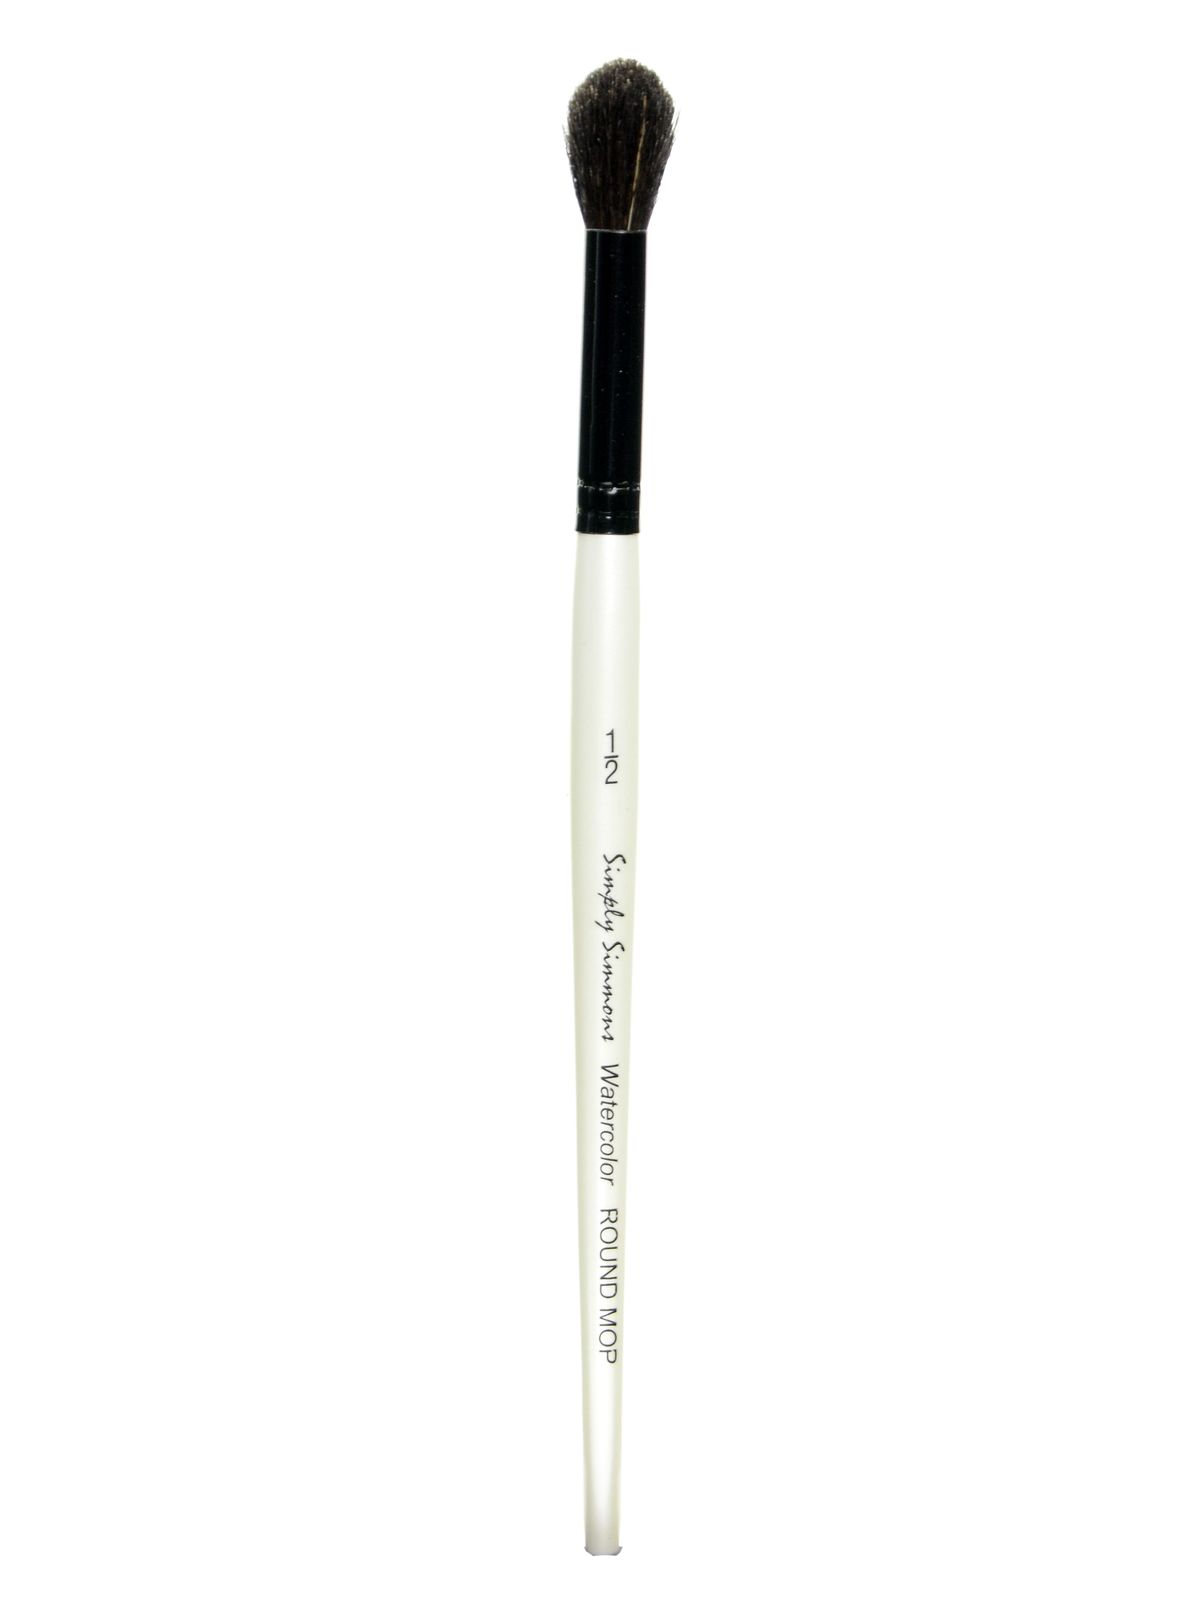 Simply Simmons Watercolor & Acrylic Short-handle Brushes 1 2 In. Round Mop Natural Black Goat